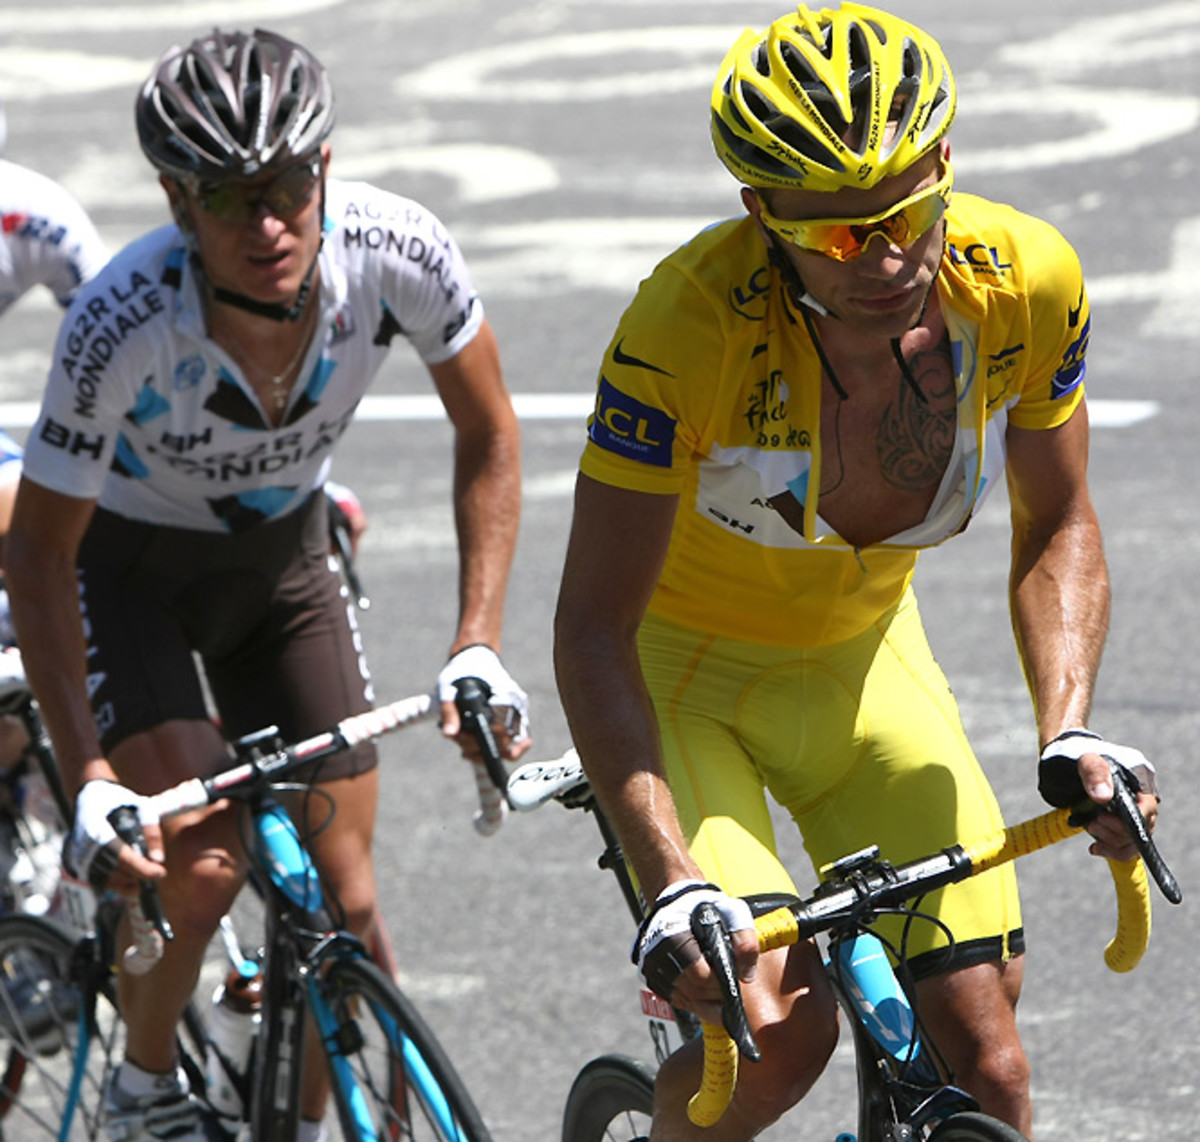 Rinaldo Nocentini (right) maintained the yellow jersey for the third straight day after the ninth stage.